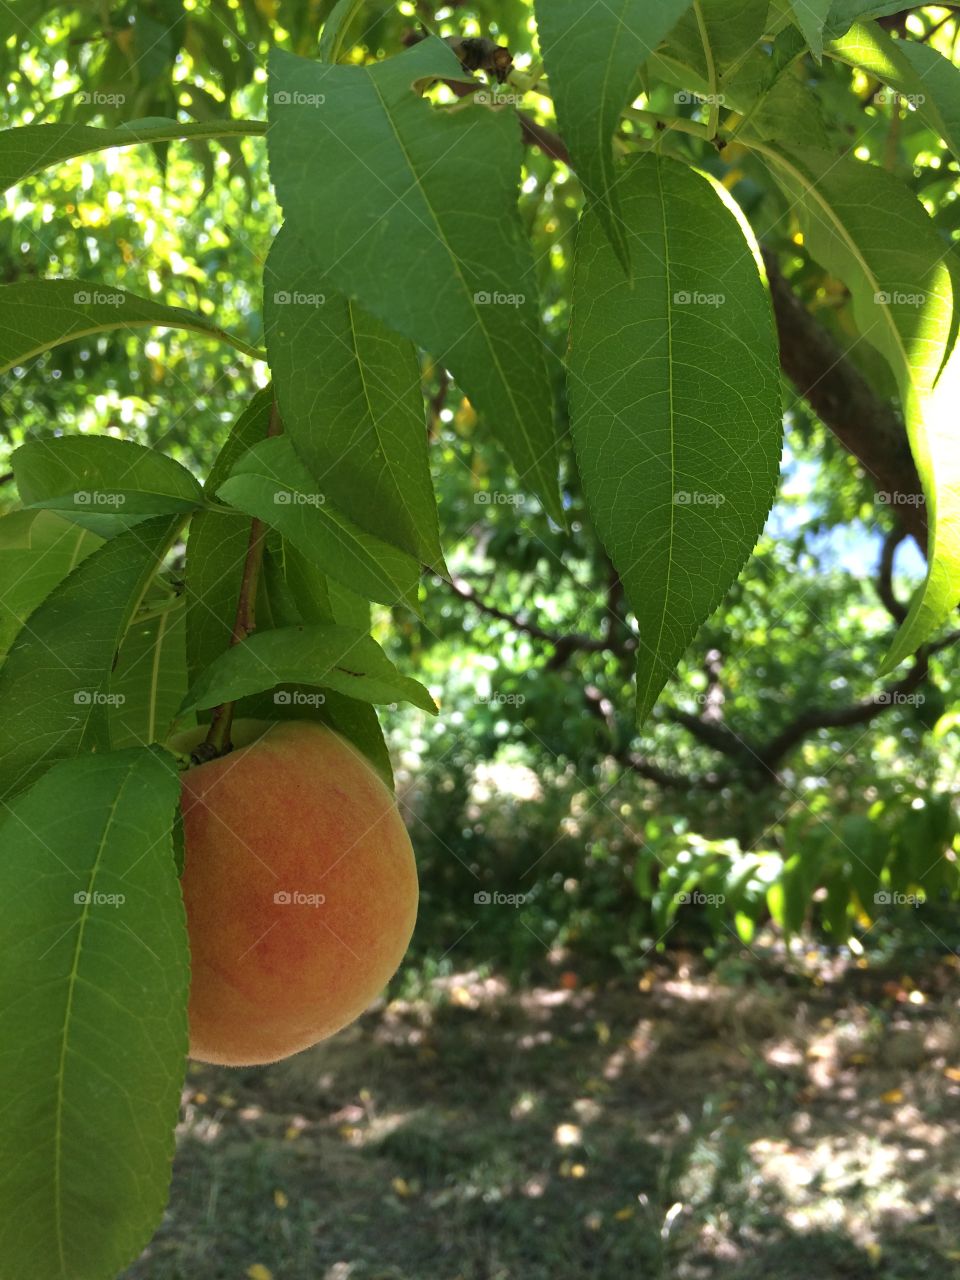 Peach Tree. Fruit picking with the family.
